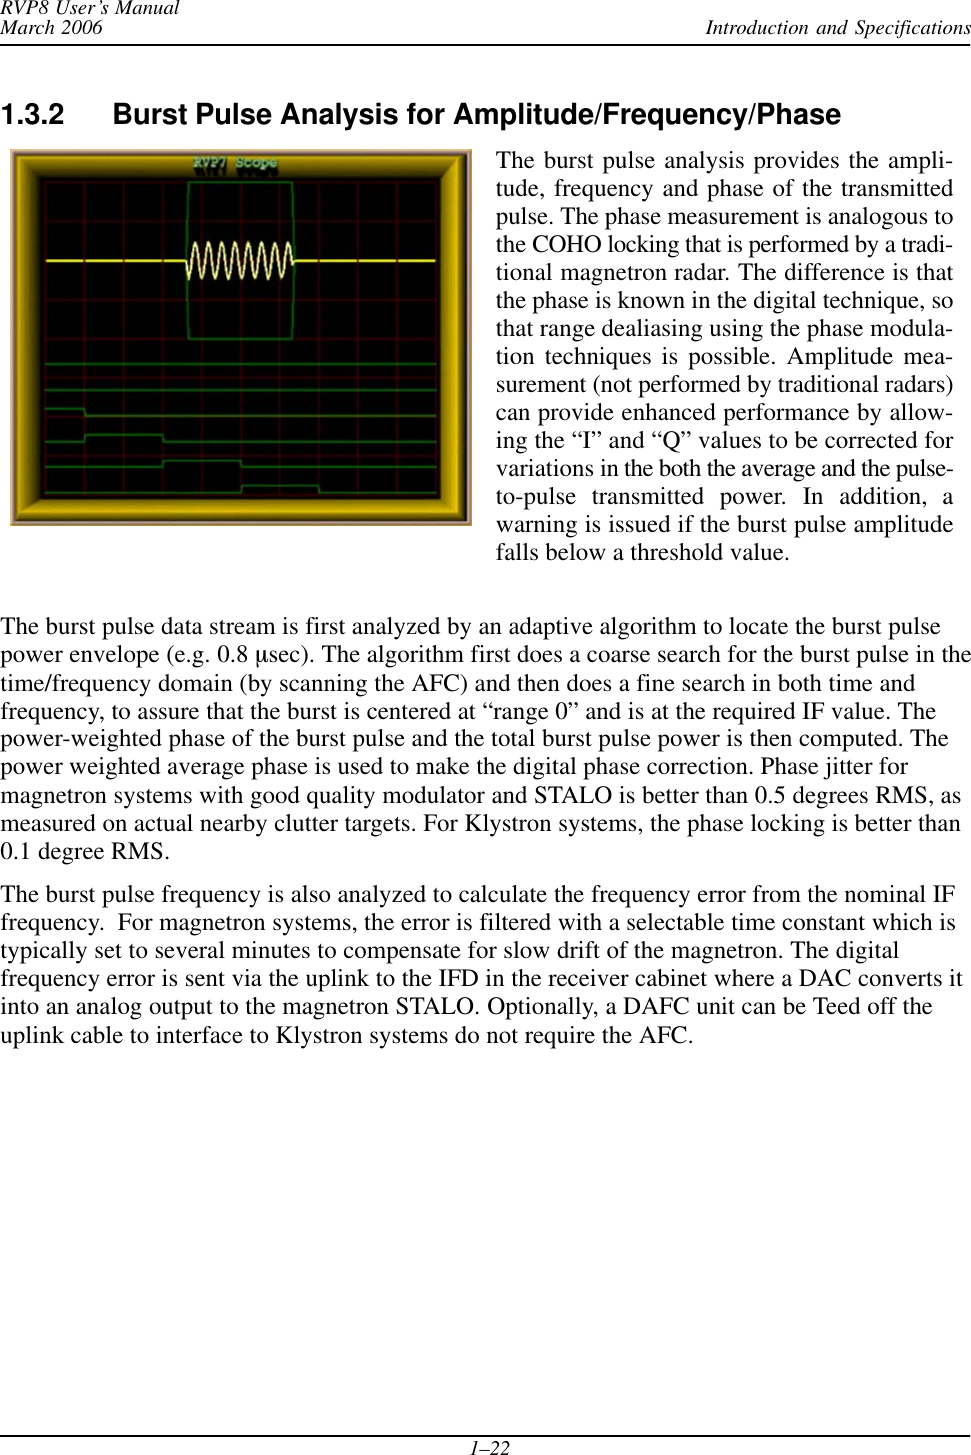 Introduction and SpecificationsRVP8 User’s ManualMarch 20061–221.3.2 Burst Pulse Analysis for Amplitude/Frequency/PhaseThe burst pulse analysis provides the ampli-tude, frequency and phase of the transmittedpulse. The phase measurement is analogous tothe COHO locking that is performed by a tradi-tional magnetron radar. The difference is thatthe phase is known in the digital technique, sothat range dealiasing using the phase modula-tion techniques is possible. Amplitude mea-surement (not performed by traditional radars)can provide enhanced performance by allow-ing the “I” and “Q” values to be corrected forvariations in the both the average and the pulse-to-pulse transmitted power. In addition, awarning is issued if the burst pulse amplitudefalls below a threshold value.The burst pulse data stream is first analyzed by an adaptive algorithm to locate the burst pulsepower envelope (e.g. 0.8 msec). The algorithm first does a coarse search for the burst pulse in thetime/frequency domain (by scanning the AFC) and then does a fine search in both time andfrequency, to assure that the burst is centered at “range 0” and is at the required IF value. Thepower-weighted phase of the burst pulse and the total burst pulse power is then computed. Thepower weighted average phase is used to make the digital phase correction. Phase jitter formagnetron systems with good quality modulator and STALO is better than 0.5 degrees RMS, asmeasured on actual nearby clutter targets. For Klystron systems, the phase locking is better than0.1 degree RMS.The burst pulse frequency is also analyzed to calculate the frequency error from the nominal IFfrequency.  For magnetron systems, the error is filtered with a selectable time constant which istypically set to several minutes to compensate for slow drift of the magnetron. The digitalfrequency error is sent via the uplink to the IFD in the receiver cabinet where a DAC converts itinto an analog output to the magnetron STALO. Optionally, a DAFC unit can be Teed off theuplink cable to interface to Klystron systems do not require the AFC.